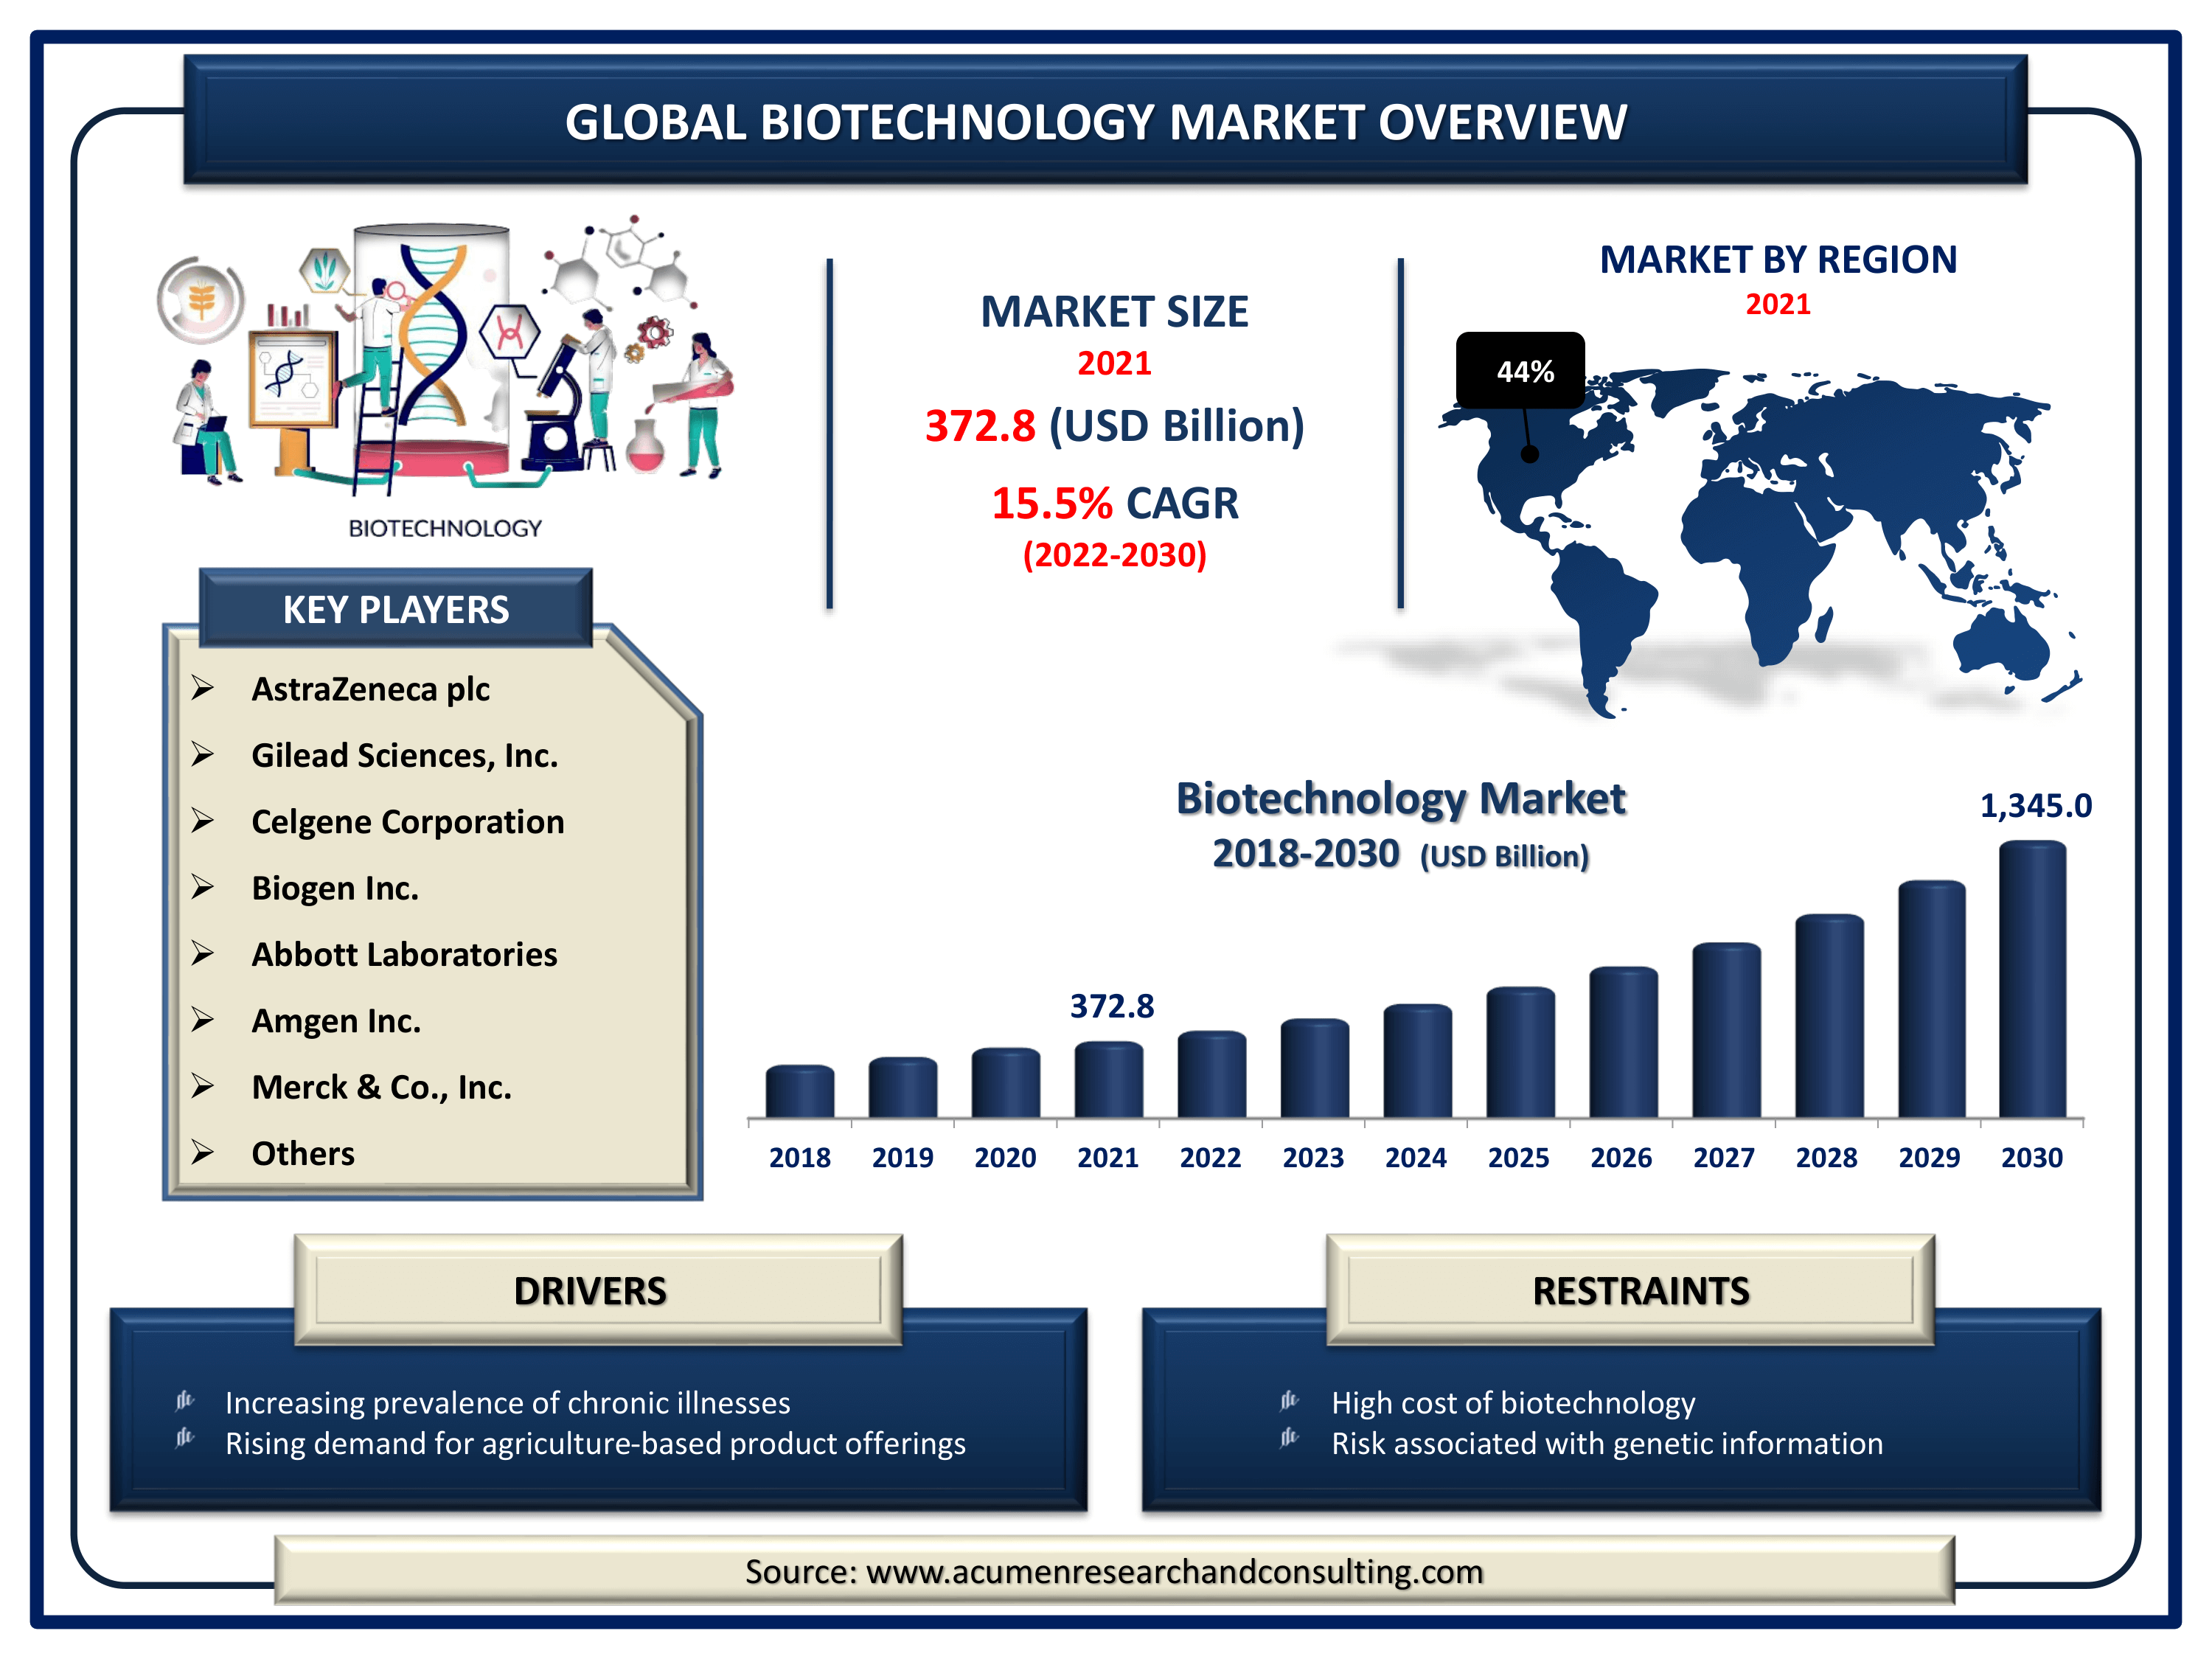 Global biotechnology market value is estimated to expand by USD 1,345.0 Billion by 2030, with a 15.5% CAGR from 2022 to 2030.